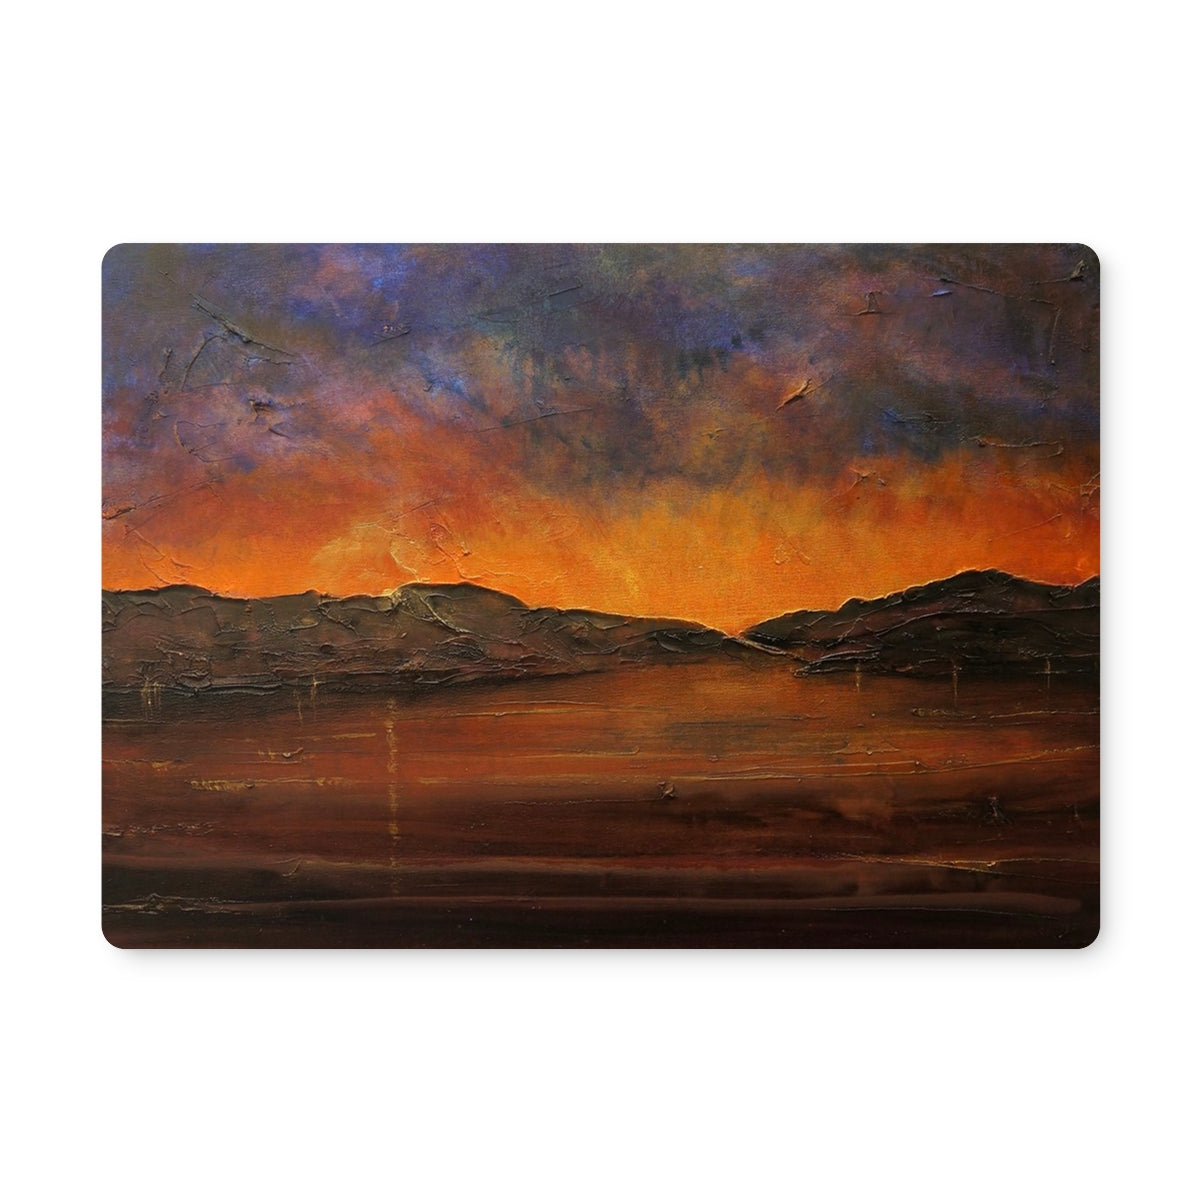 A Brooding Clyde Dusk Art Gifts Placemat-Placemats-River Clyde Art Gallery-2 Placemats-Paintings, Prints, Homeware, Art Gifts From Scotland By Scottish Artist Kevin Hunter